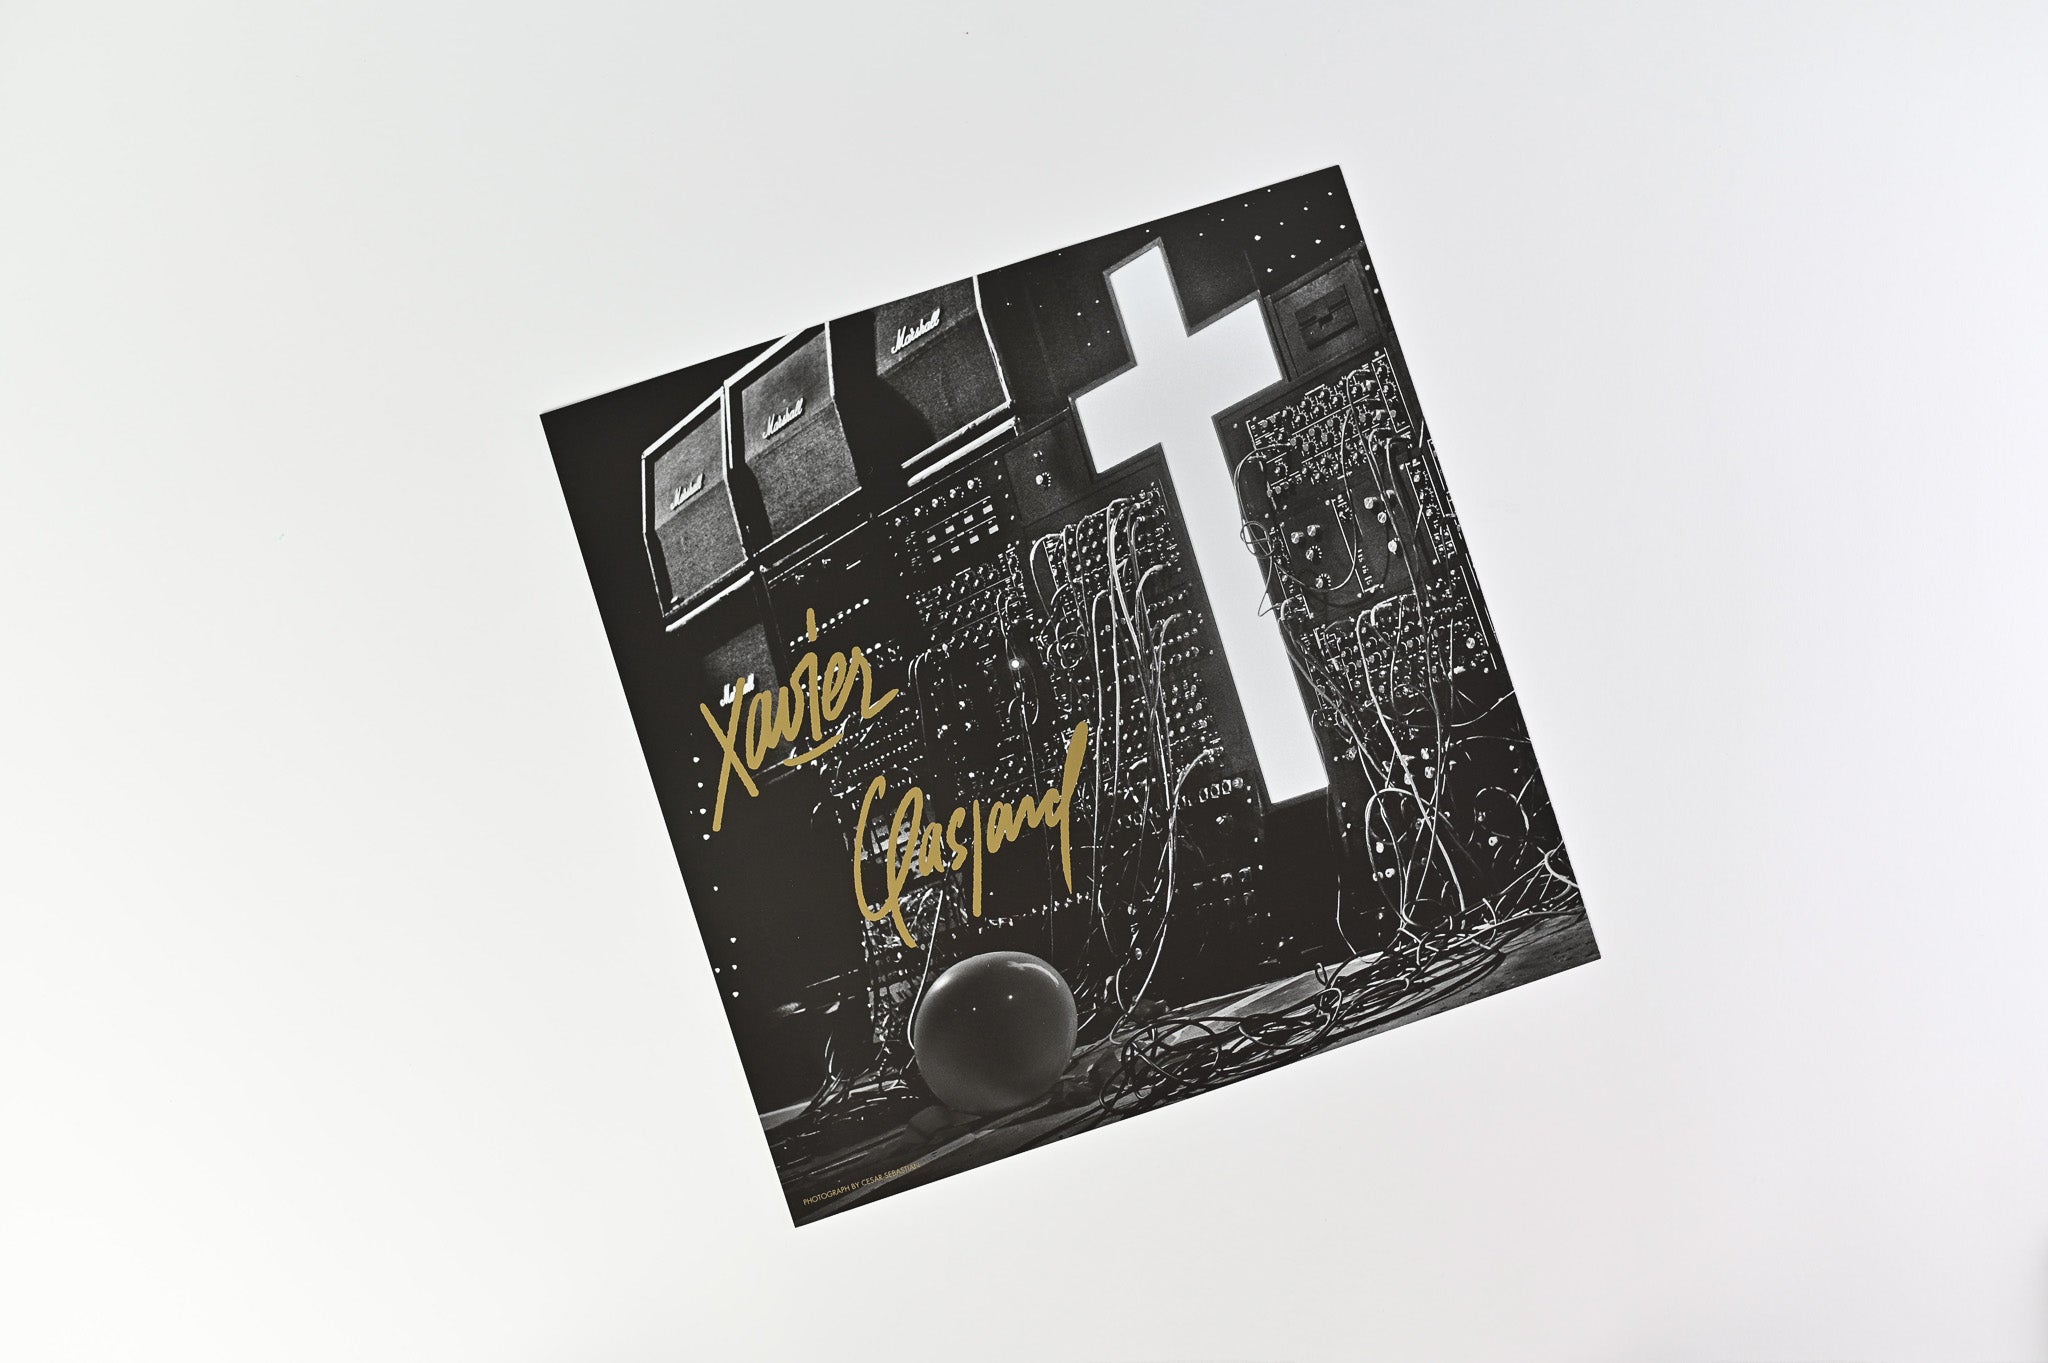 Justice - † on Ed Banger/Because Music Vinyl Me, Please Reissue Gold Nugget Vinyl